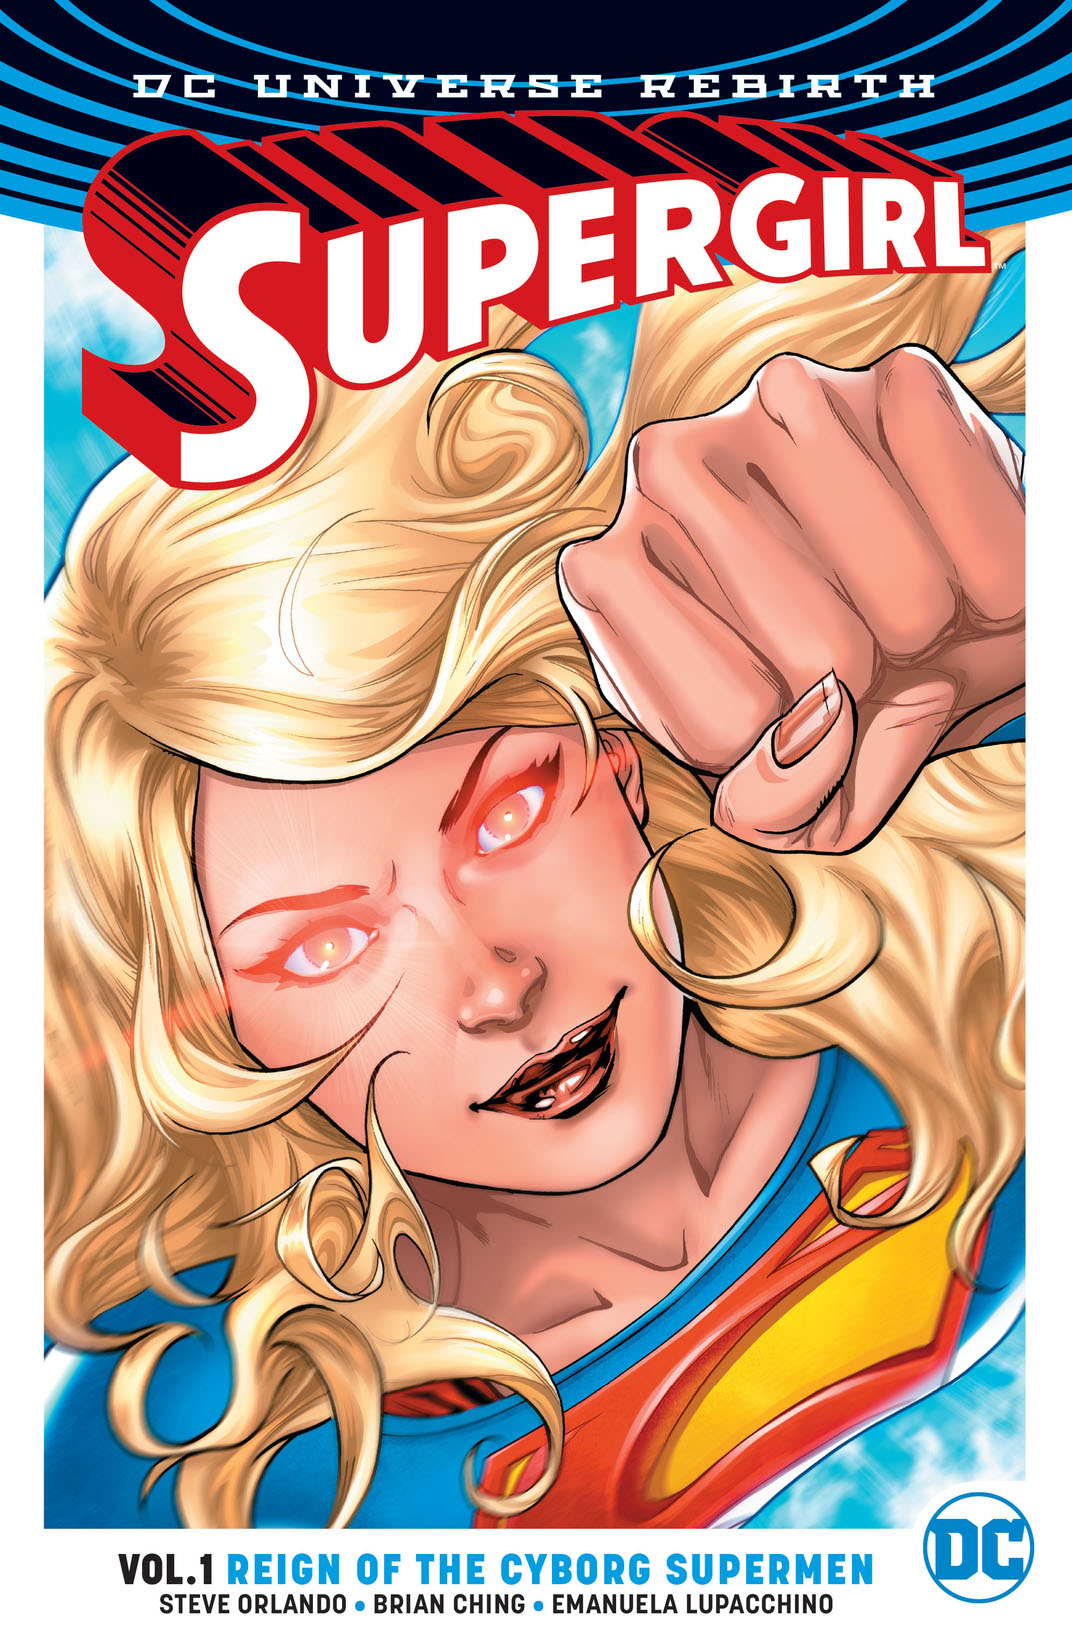 Supergirl Vol. 1: Reign of the Cyborg Supermen preview images